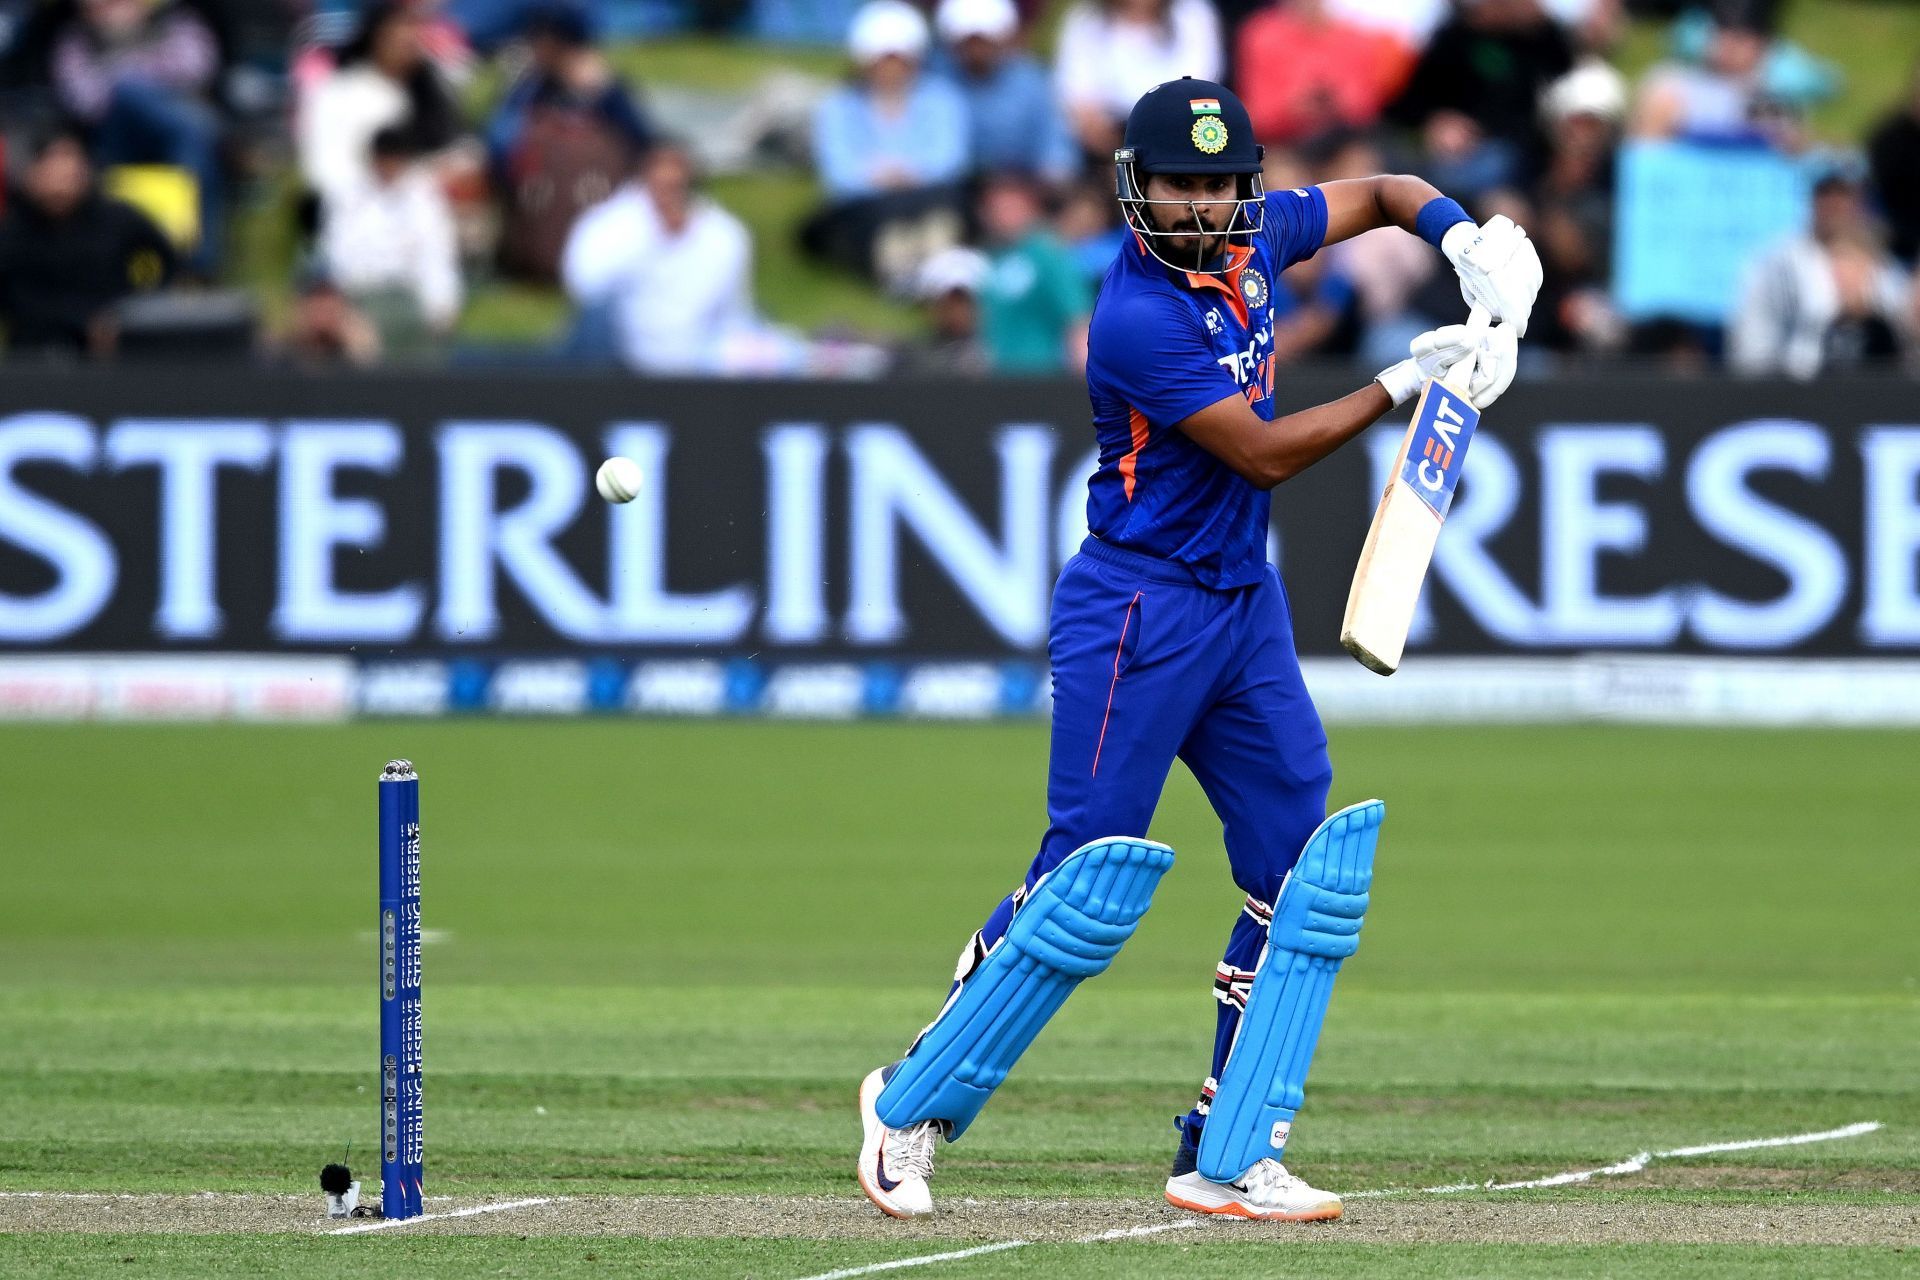 Shreyas Iyer struck two fours during his innings.